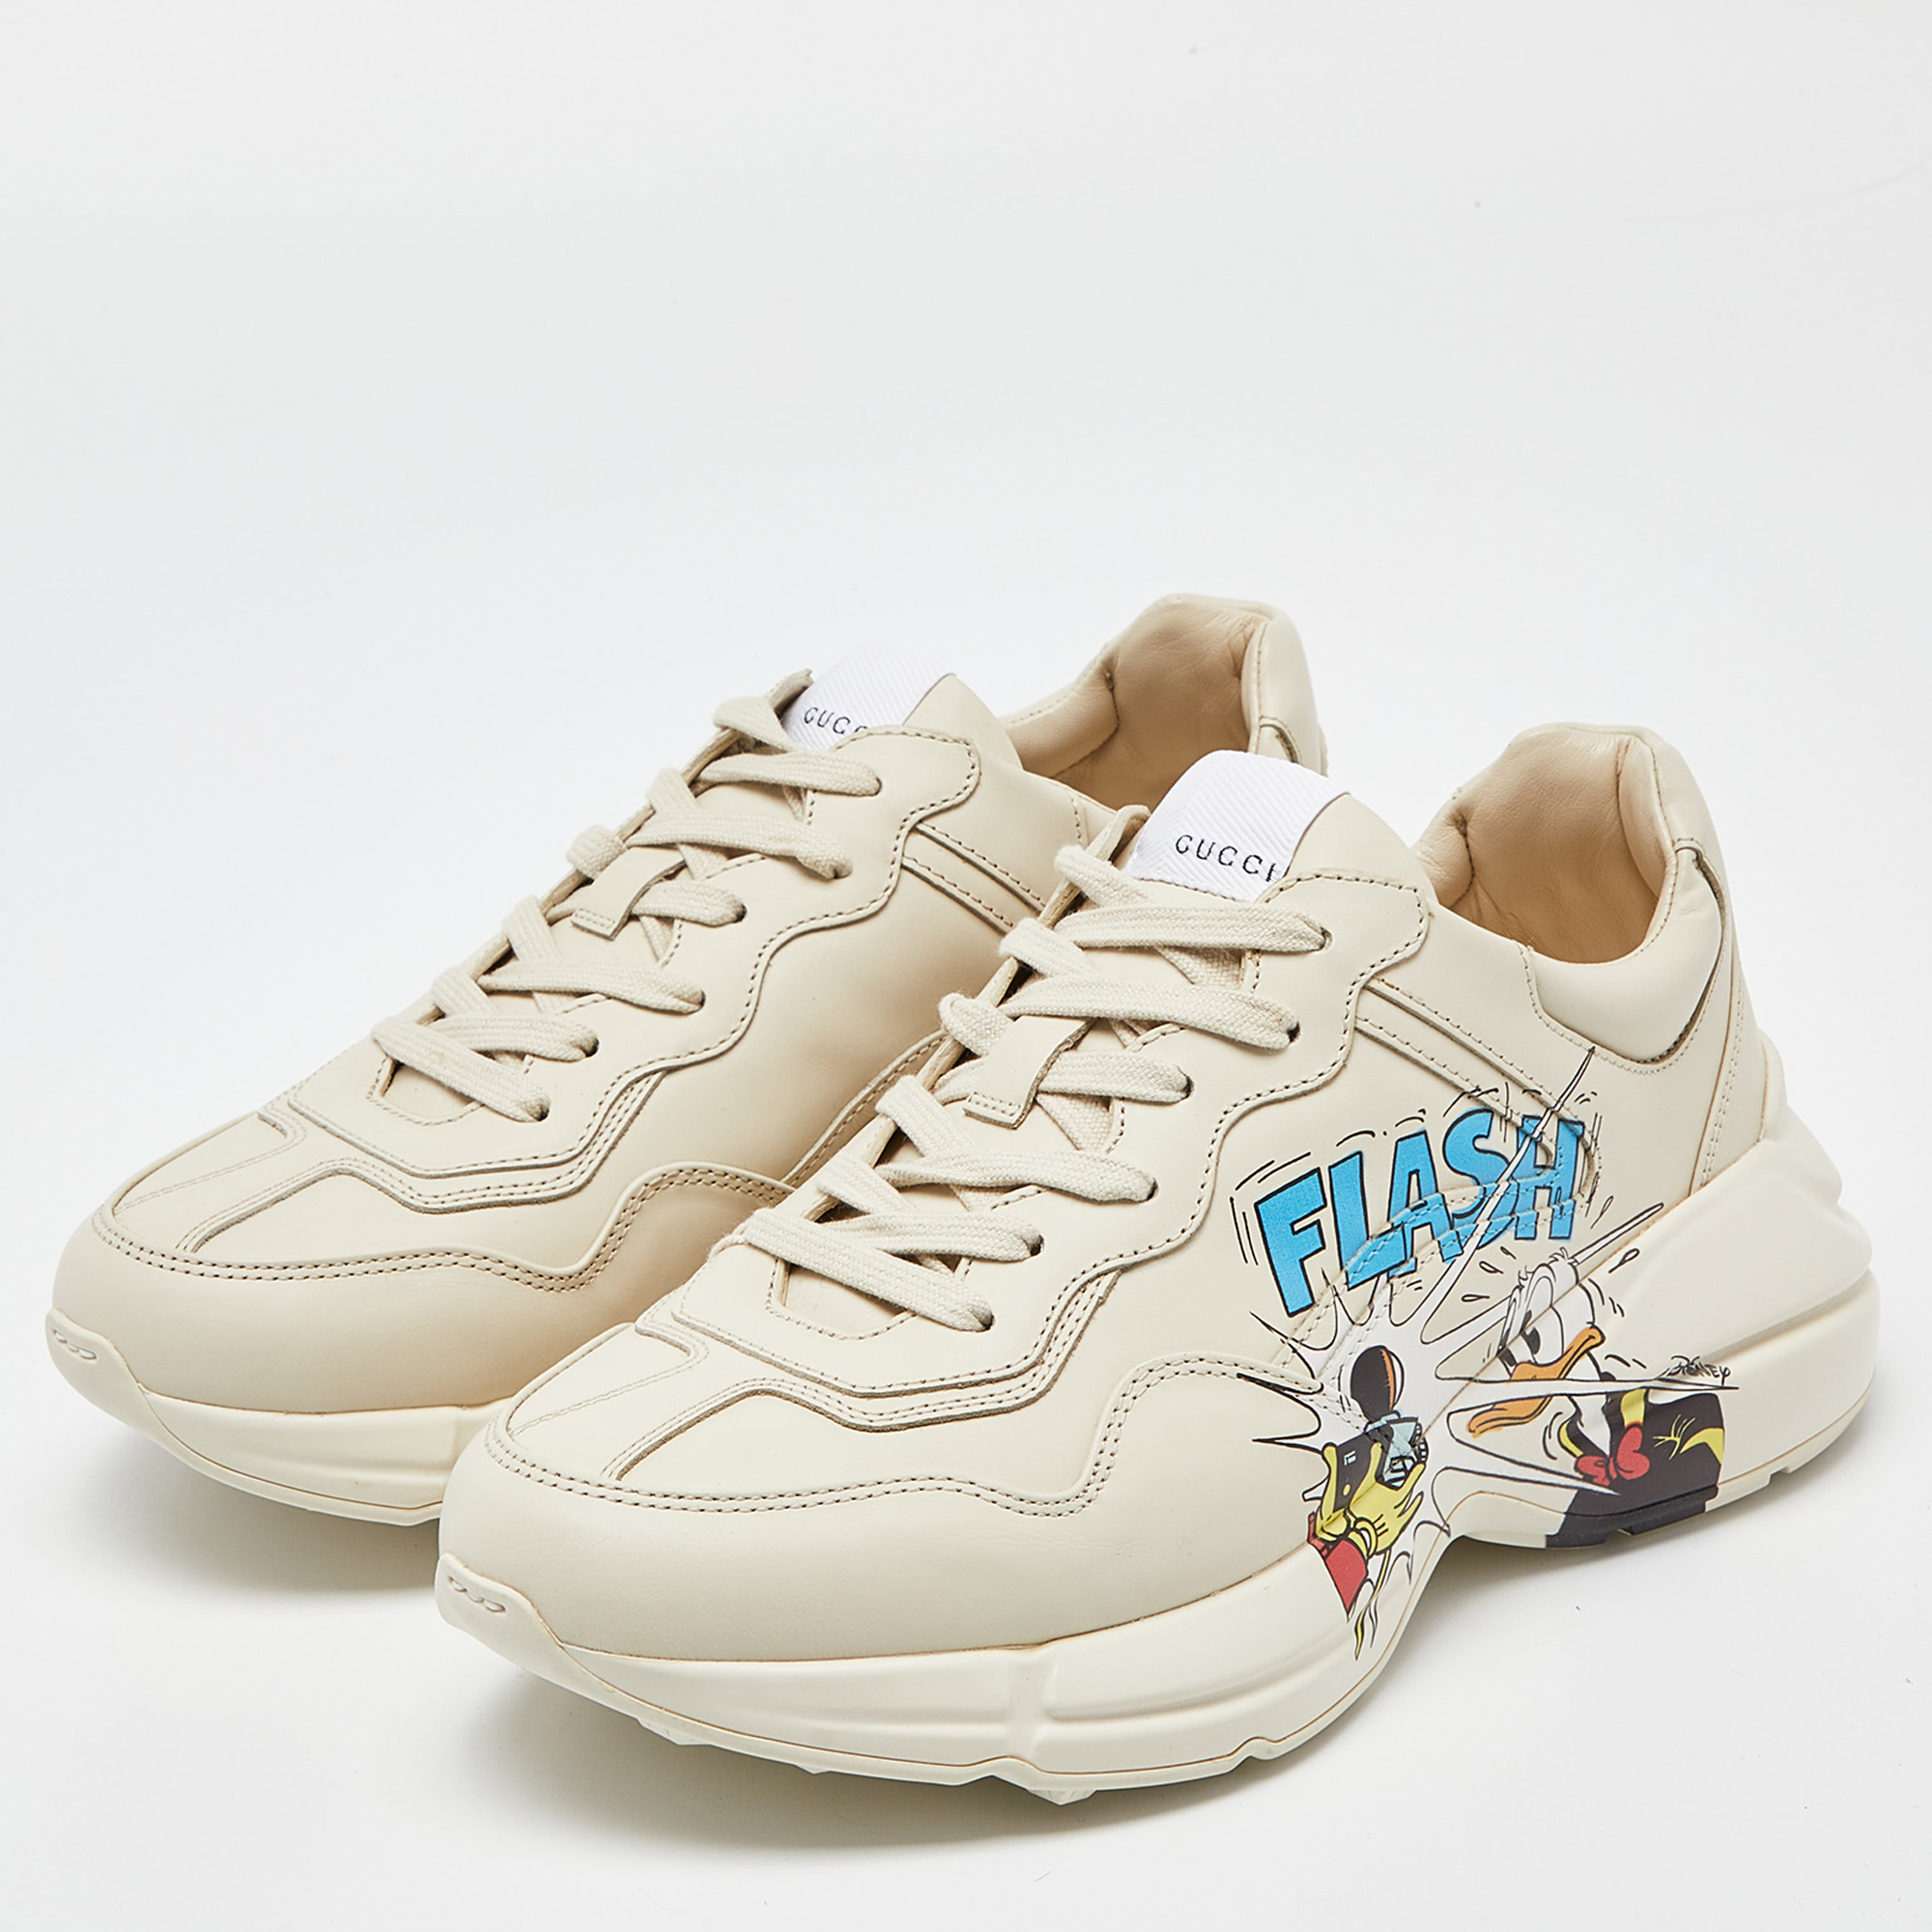 

Gucci x Disney Donald Duck Cream Leather Rhyton Sneakers Size